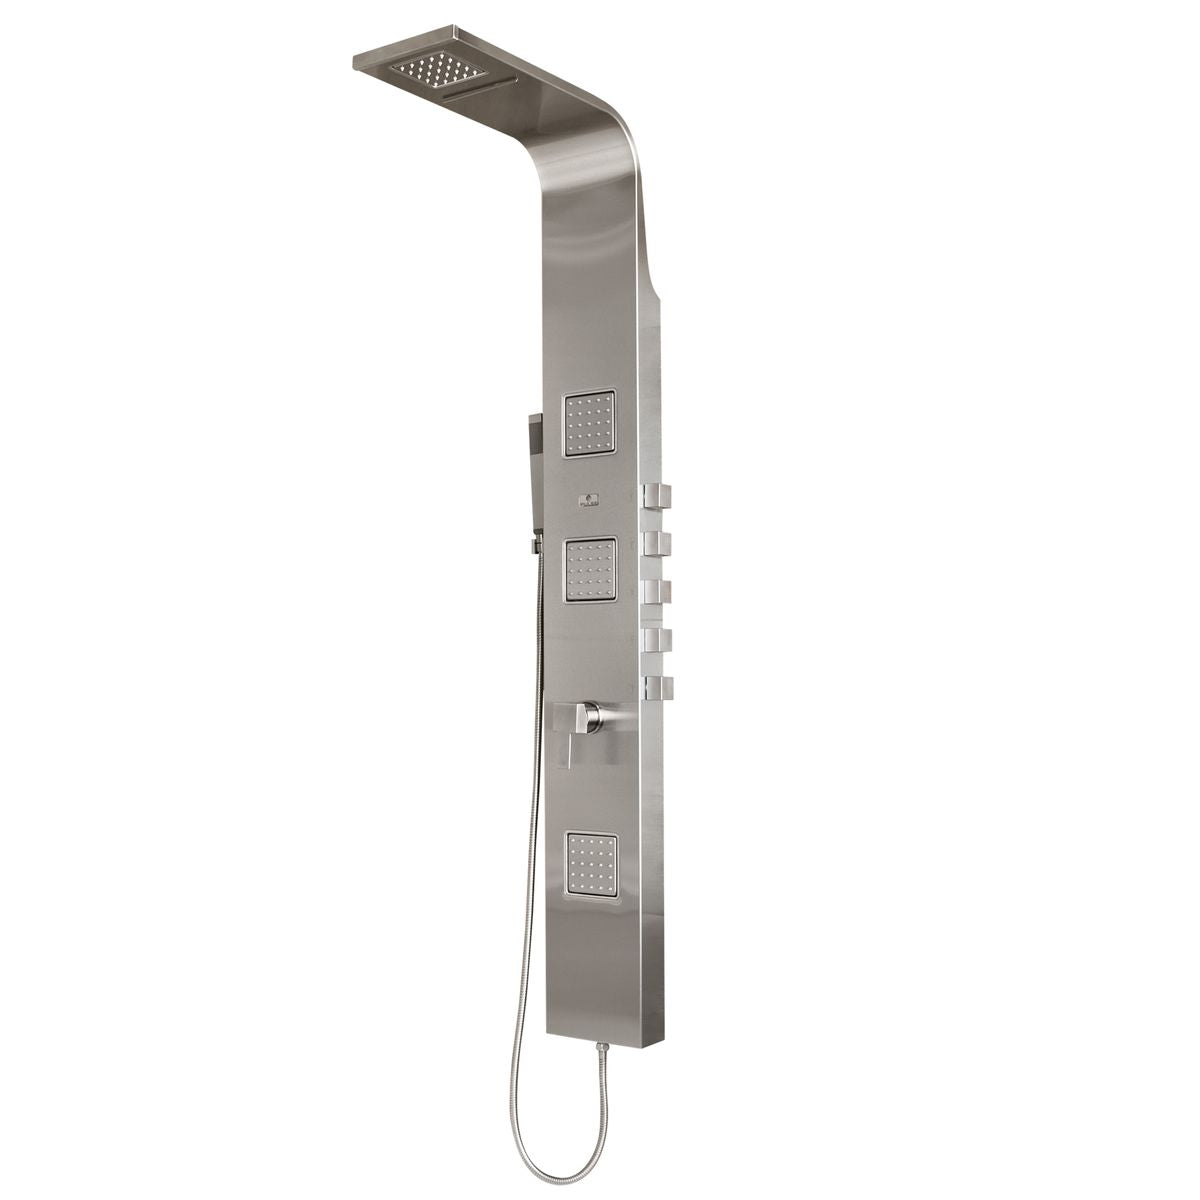 PULSE ShowerSpas Matte Brushed Stainless Steel Shower Panel - Waimea ShowerSpa 1034 - with 6" Waterfall showerhead and 4" rain showerhead, hand shower with 59" double-interlocking stainless steel hose, 3 Extra-large adjustable body jets and Multiple diverters - Vital Hydrotherapy